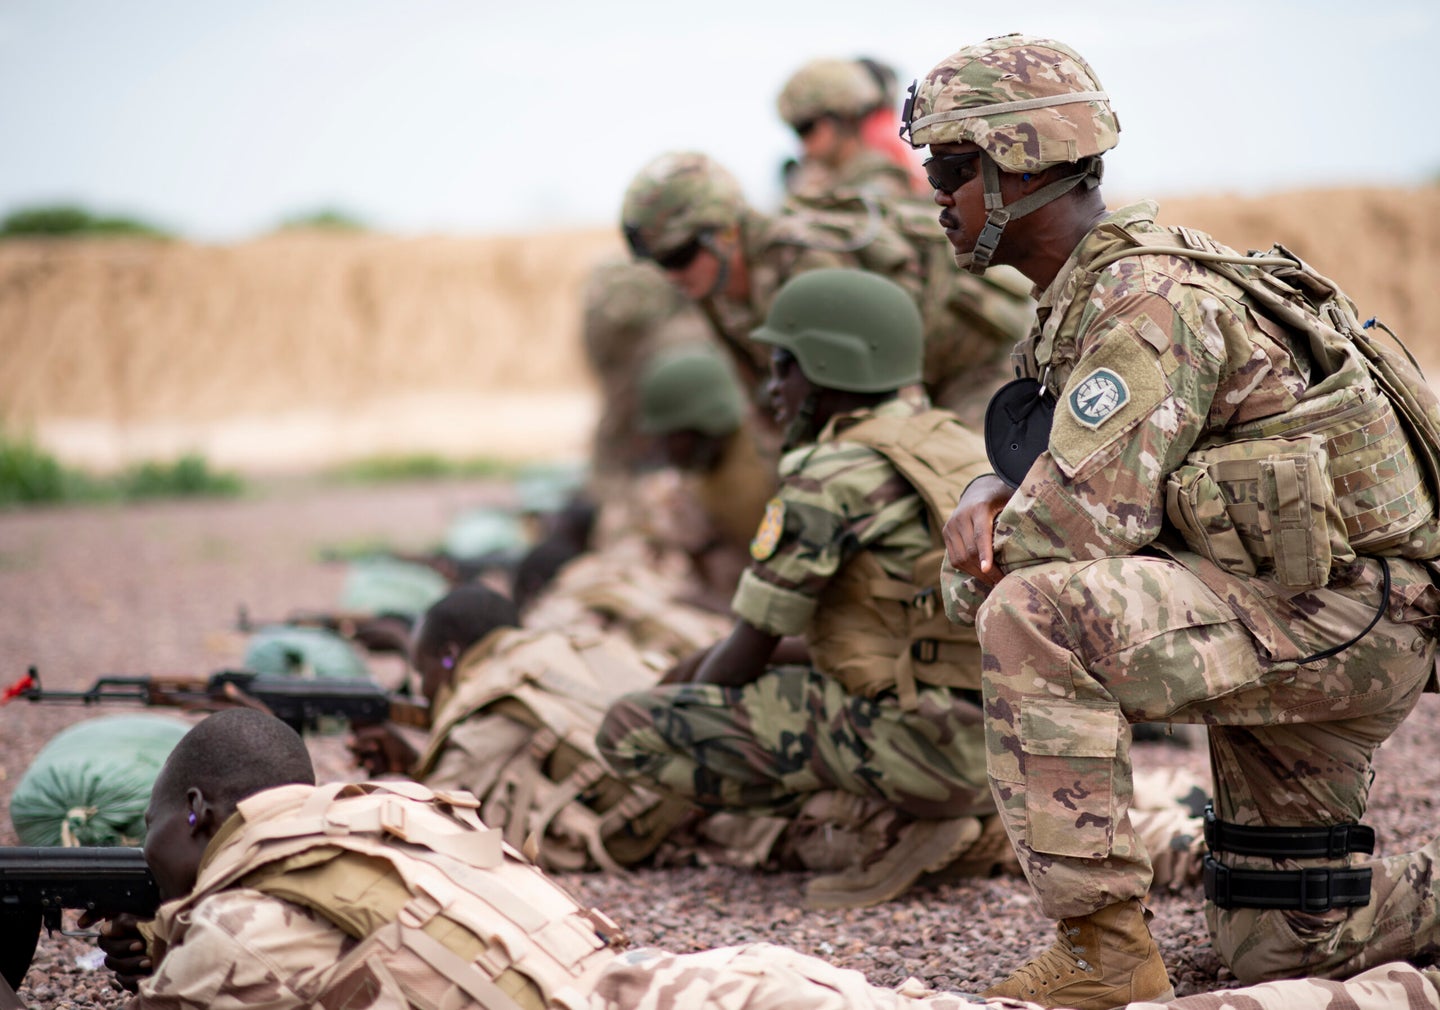 As the U.S. plans for a withdrawal of American troops from Niger, it's also facing calls from its neighbor, Chad, to remove its small contingent of troops. (U.S. Navy photo by Mass Communication Specialist Second Class Evan Parker)